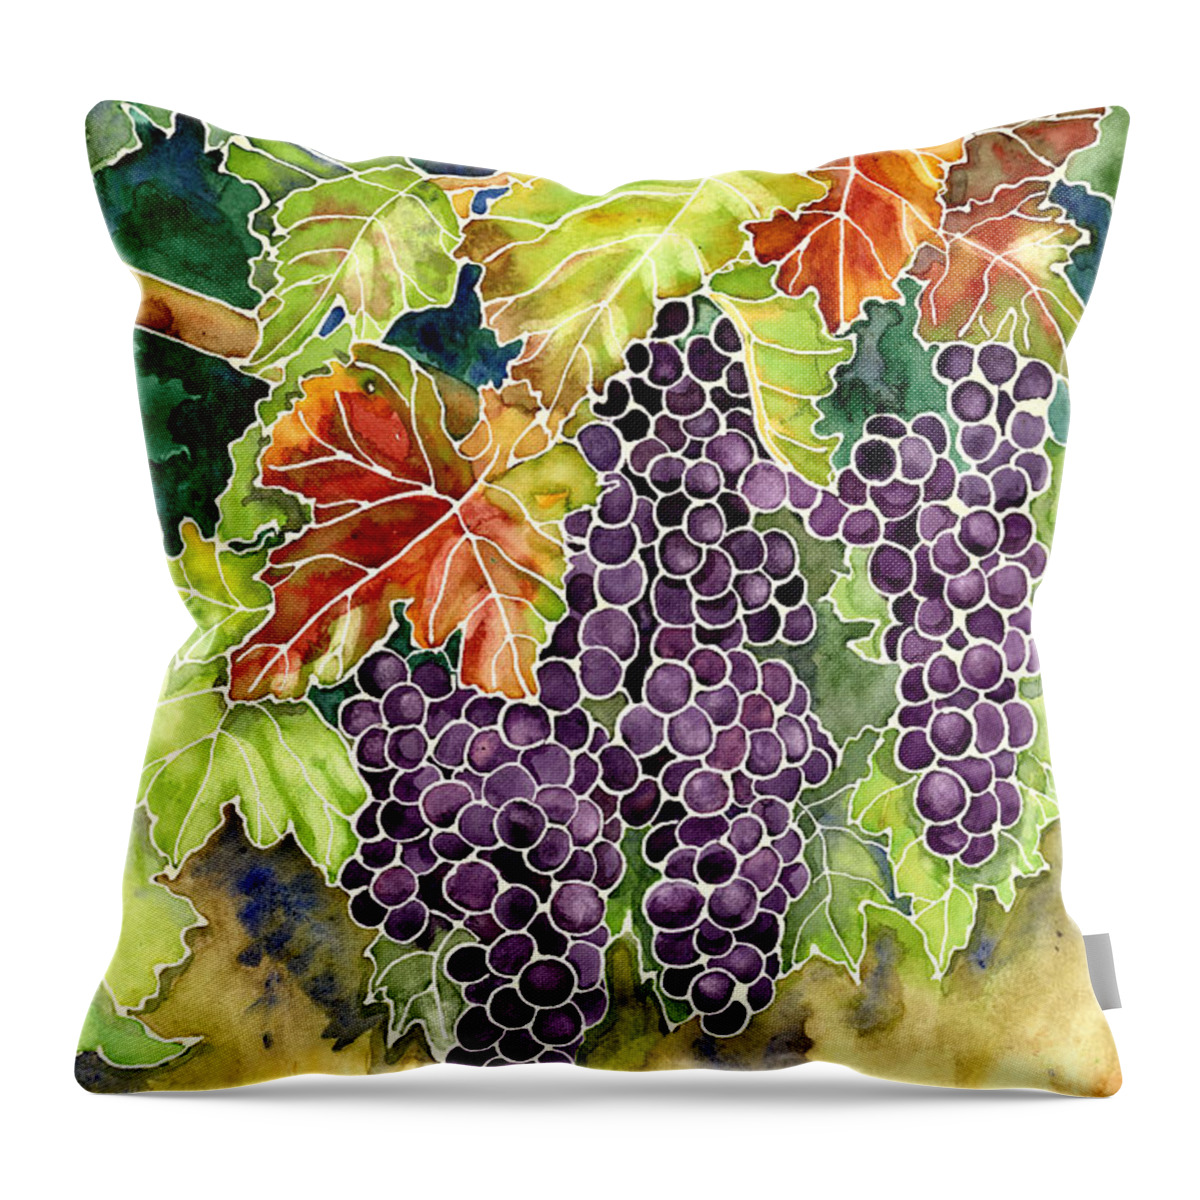 Cabernet Sauvignon Grapes Throw Pillow featuring the painting Autumn Vineyard in its Glory - Batik Style by Audrey Jeanne Roberts